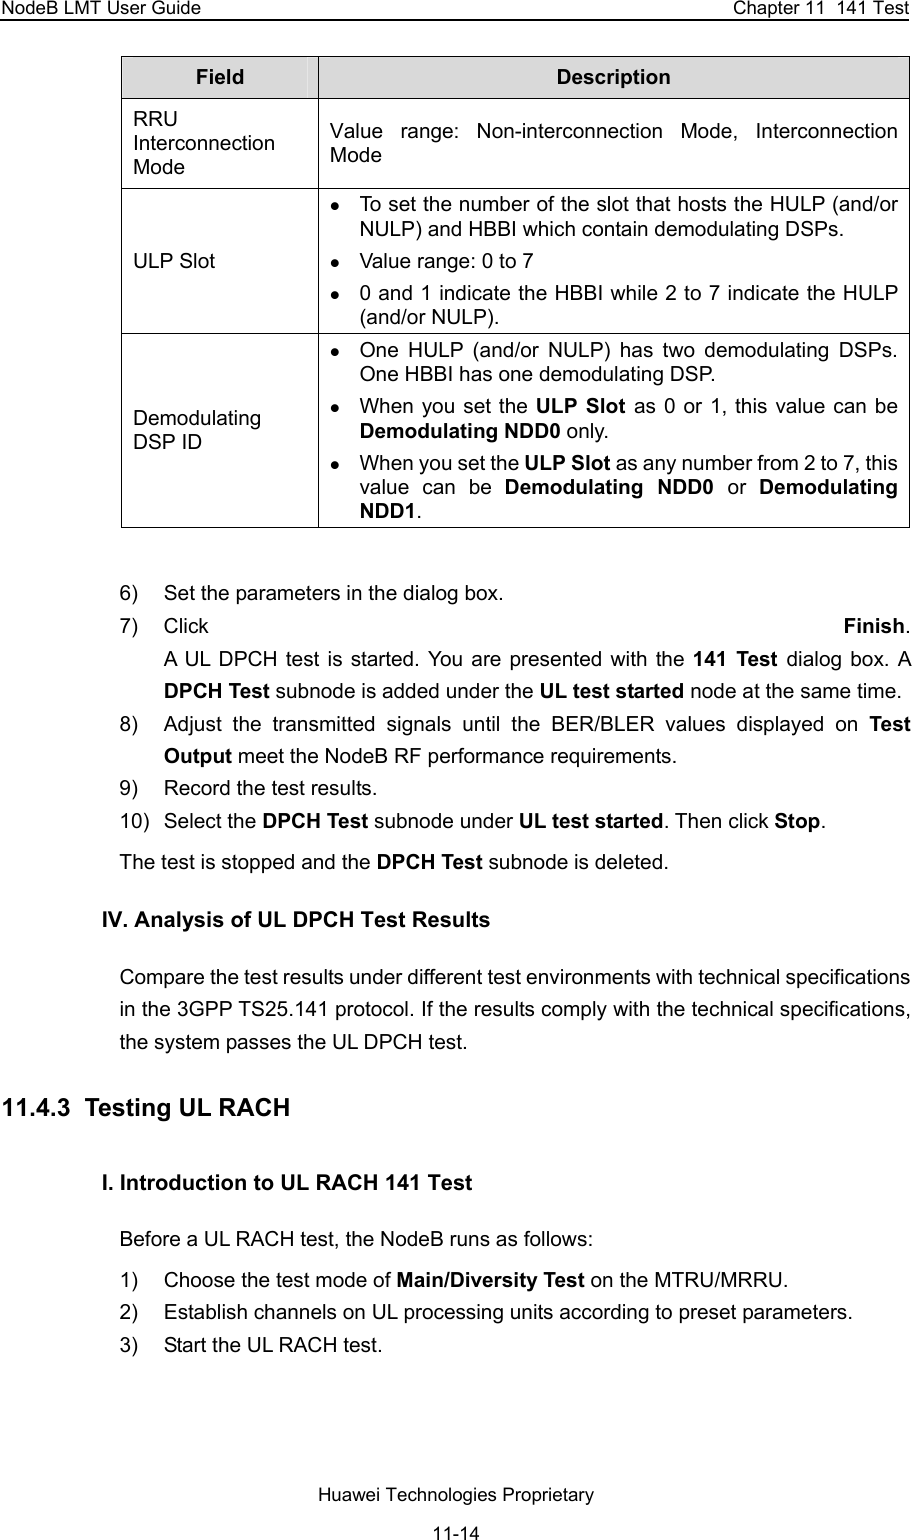 NodeB LMT User Guide  Chapter 11  141 Test Field   Description  RRU Interconnection Mode Value range: Non-interconnection Mode, Interconnection Mode ULP Slot z To set the number of the slot that hosts the HULP (and/or NULP) and HBBI which contain demodulating DSPs.  z Value range: 0 to 7 z 0 and 1 indicate the HBBI while 2 to 7 indicate the HULP (and/or NULP).  Demodulating DSP ID z One HULP (and/or NULP) has two demodulating DSPs. One HBBI has one demodulating DSP.  z When you set the ULP Slot as 0 or 1, this value can be Demodulating NDD0 only. z When you set the ULP Slot as any number from 2 to 7, this value can be Demodulating NDD0 or  Demodulating NDD1.  6)  Set the parameters in the dialog box.  7) Click  Finish.  A UL DPCH test is started. You are presented with the 141 Test dialog box. A DPCH Test subnode is added under the UL test started node at the same time. 8)  Adjust the transmitted signals until the BER/BLER values displayed on Test Output meet the NodeB RF performance requirements.  9)  Record the test results. 10) Select the DPCH Test subnode under UL test started. Then click Stop.  The test is stopped and the DPCH Test subnode is deleted. IV. Analysis of UL DPCH Test Results Compare the test results under different test environments with technical specifications in the 3GPP TS25.141 protocol. If the results comply with the technical specifications, the system passes the UL DPCH test.  11.4.3  Testing UL RACH  I. Introduction to UL RACH 141 Test Before a UL RACH test, the NodeB runs as follows:  1)  Choose the test mode of Main/Diversity Test on the MTRU/MRRU.  2)  Establish channels on UL processing units according to preset parameters.  3)  Start the UL RACH test.  Huawei Technologies Proprietary 11-14 